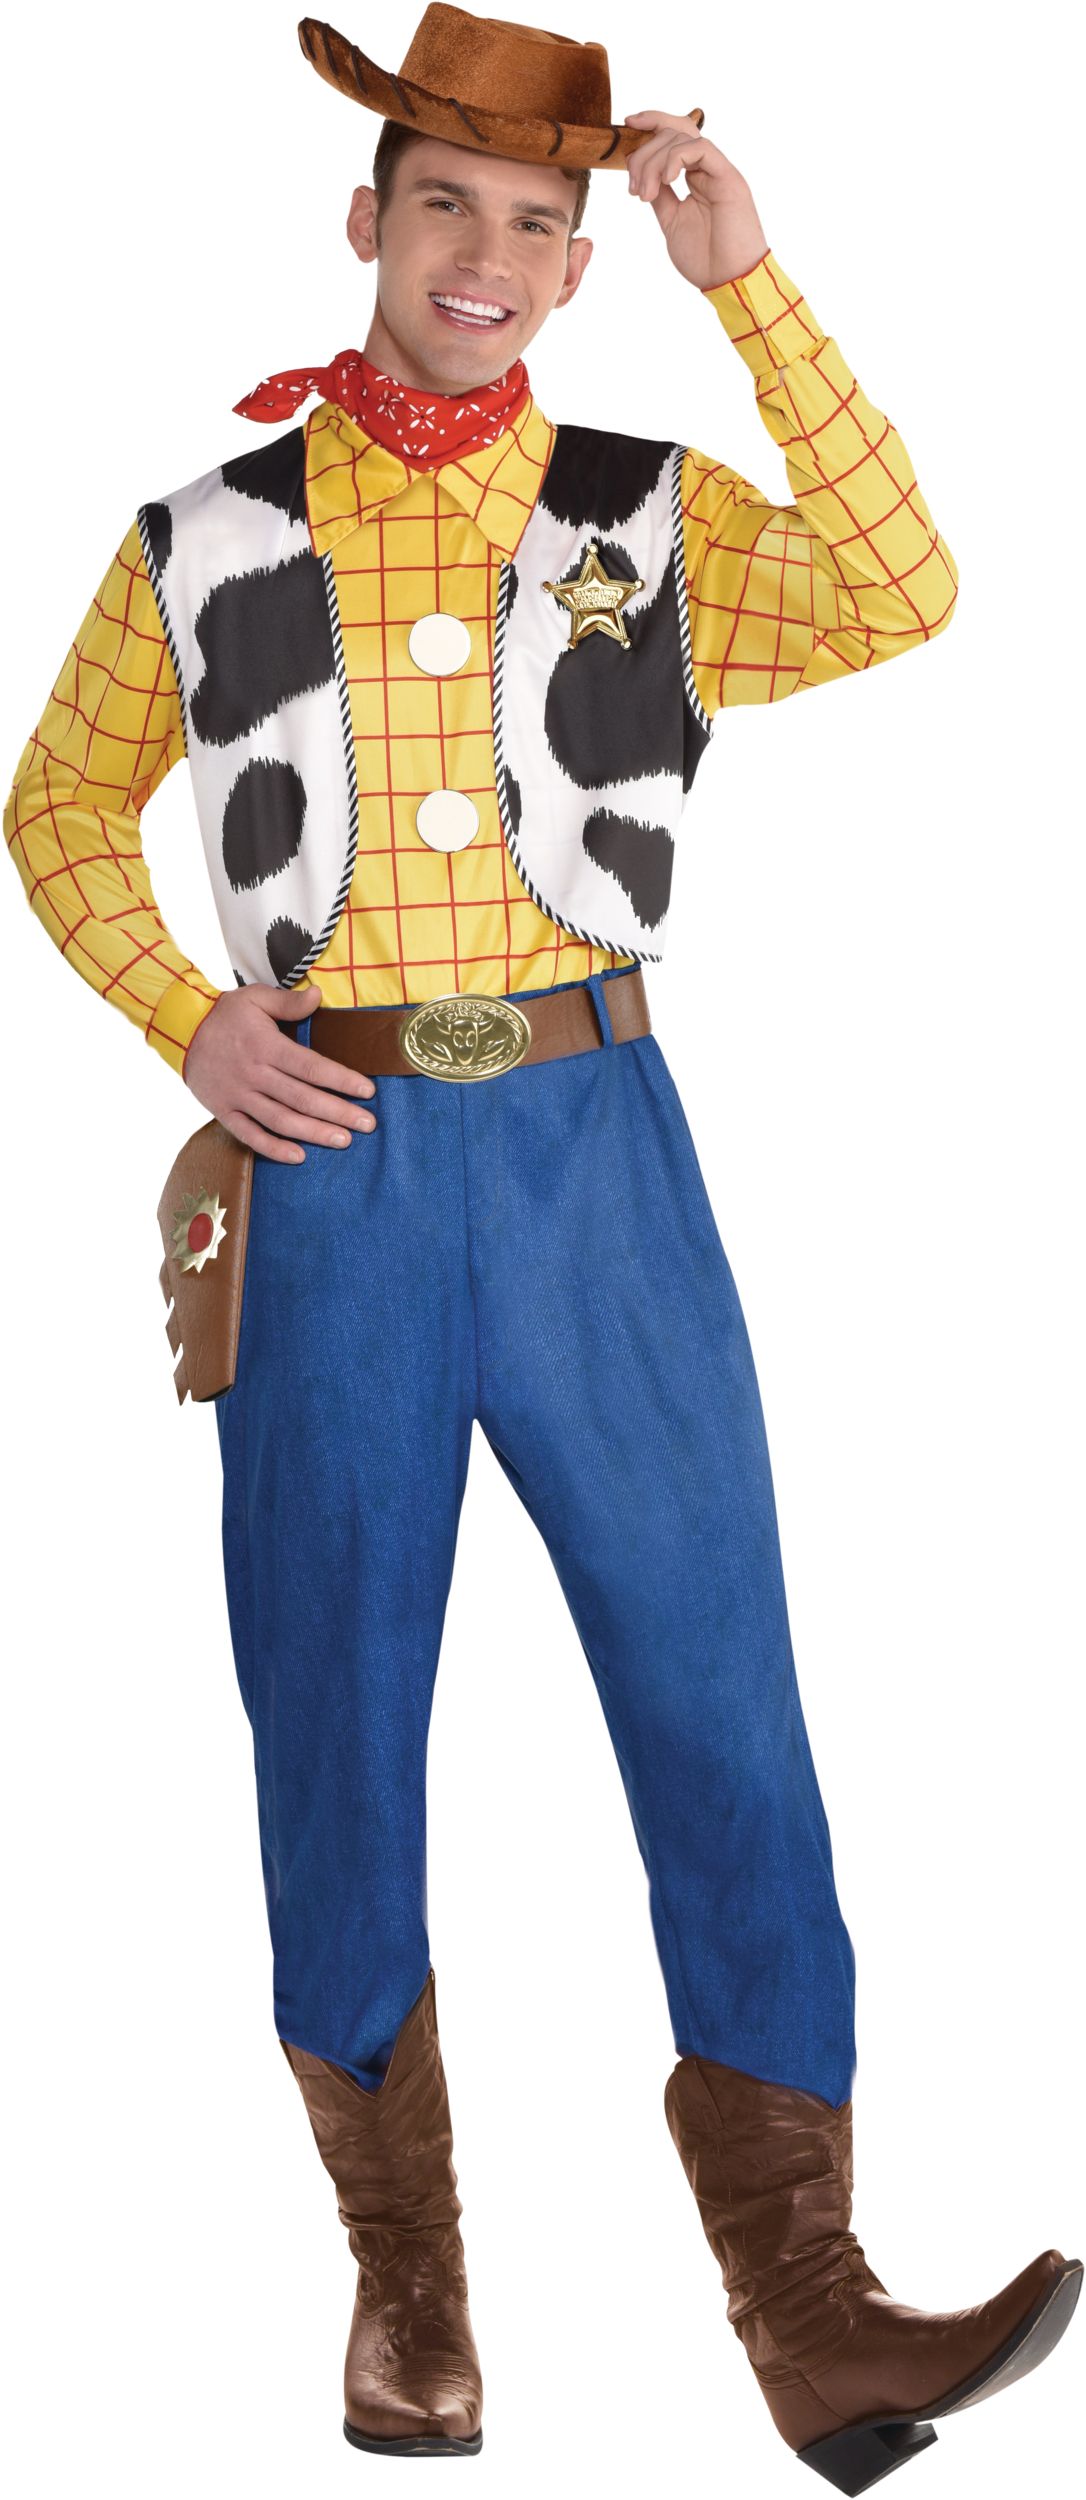 Adult Woody Costume Toy Story 4 Standard Size 7b980490 2099 4624 9eee A28d01178cff Jpgrendition 